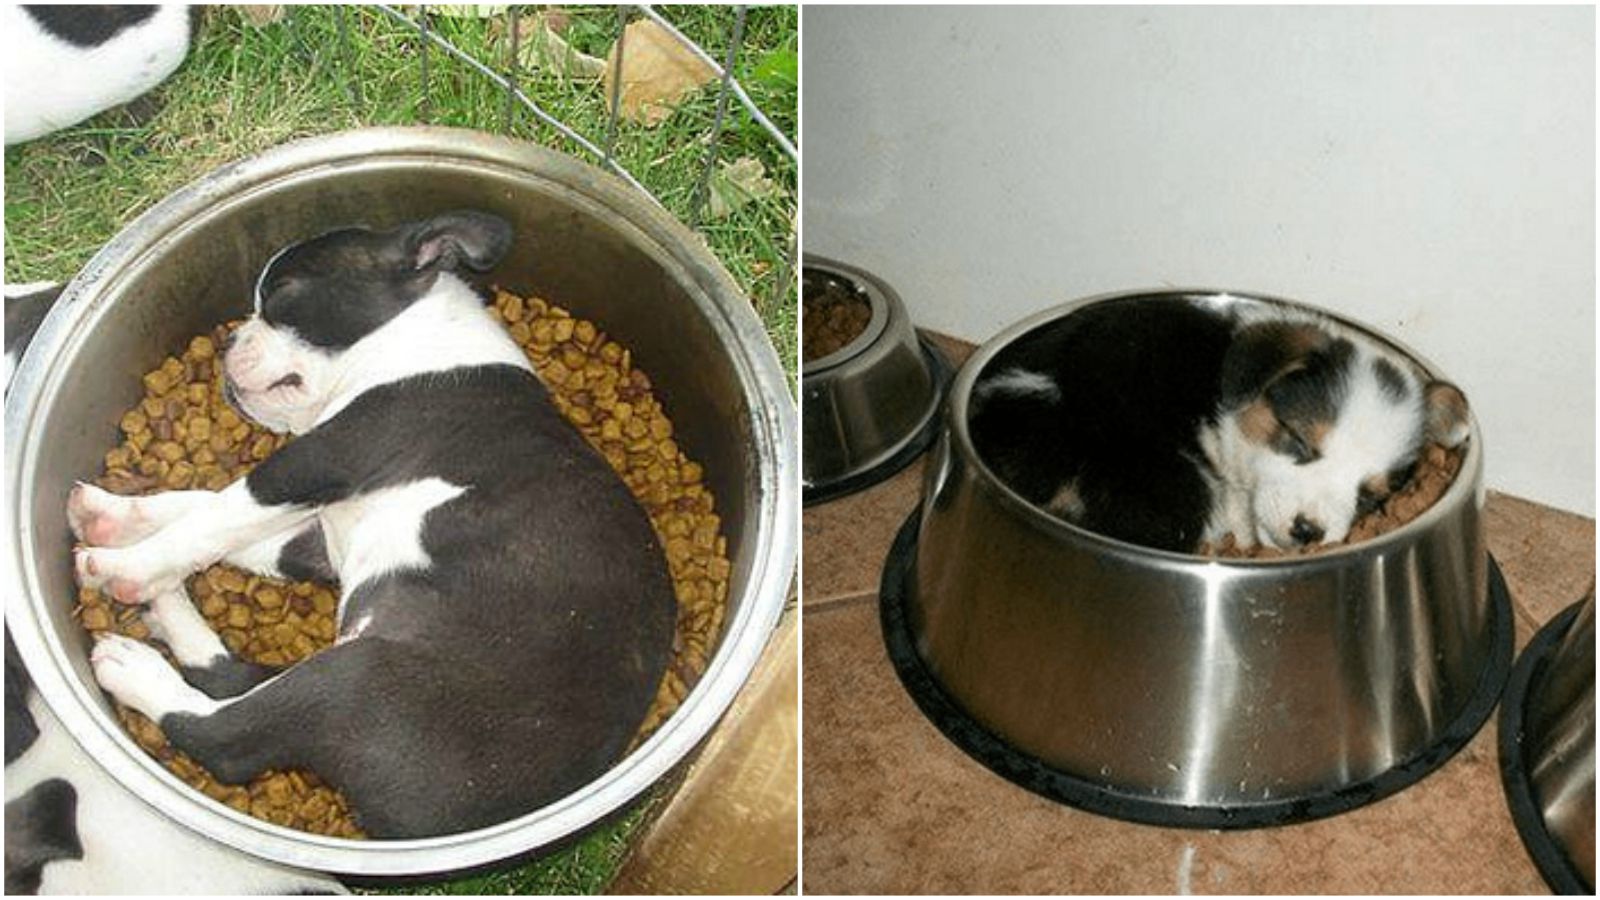 25 Adorable Dogs Asleep in Their Food Dish Is Happiness in a Bowl